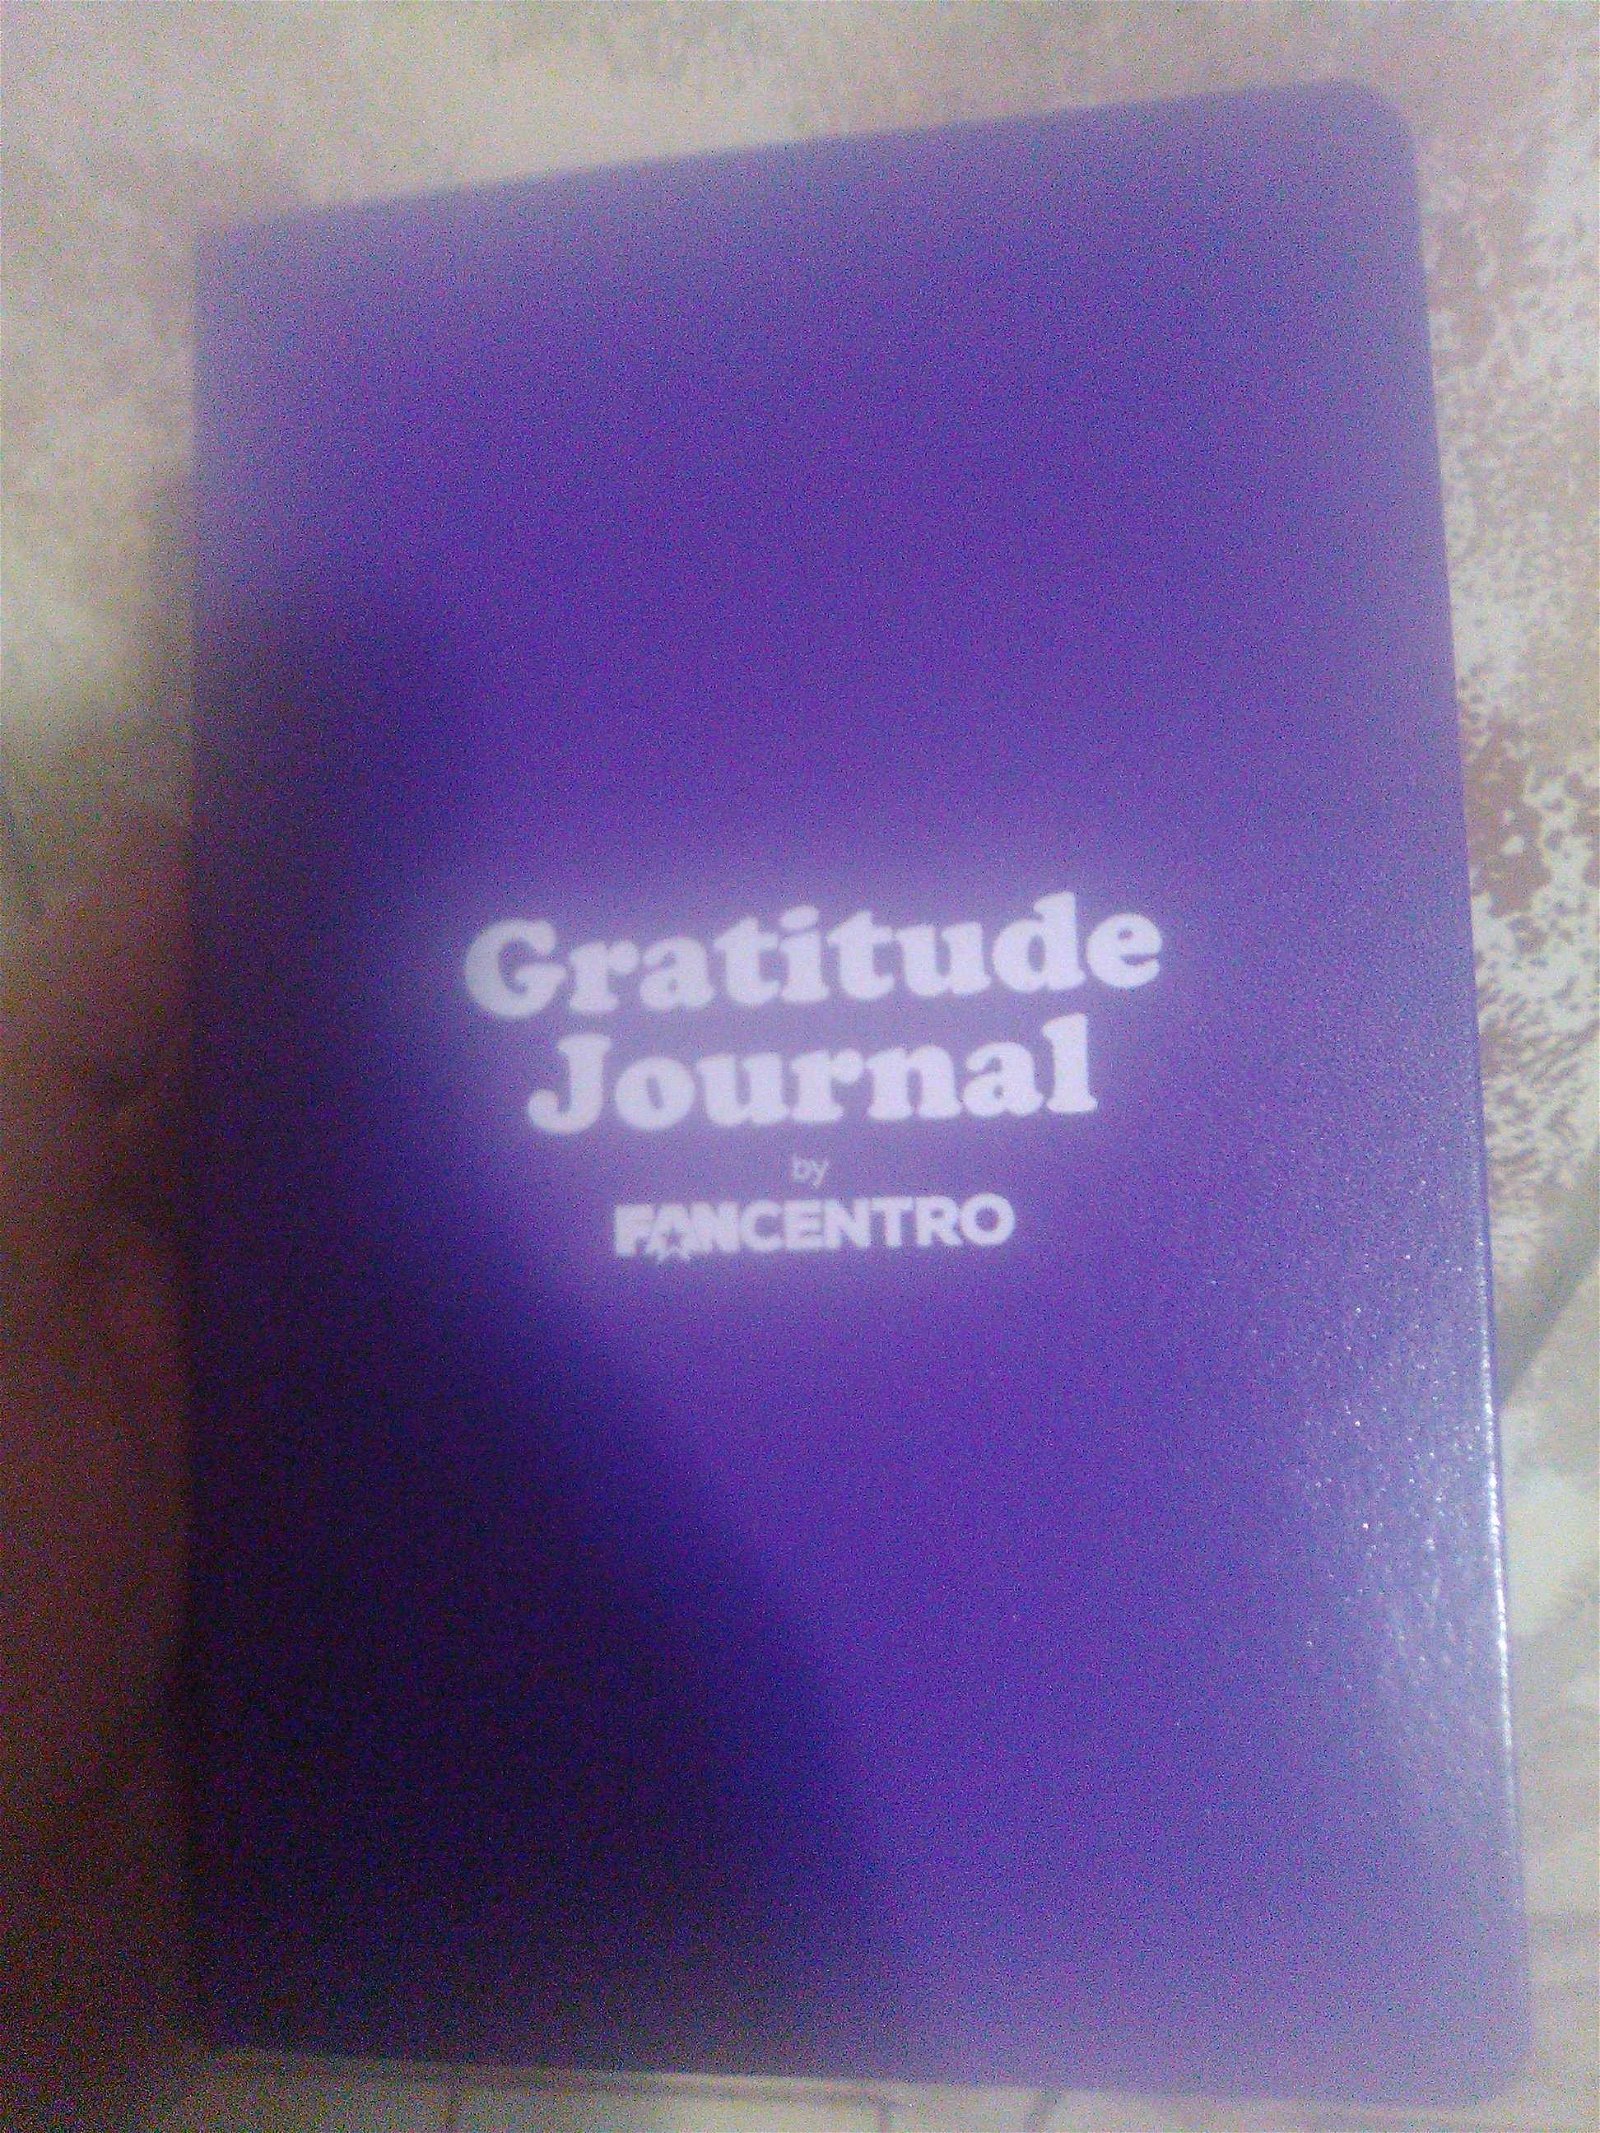 Photo by Luna Frost with the username @cannapoet, who is a star user,  December 17, 2019 at 2:01 AM and the text says 'Look what I got in the Mail today. Thankful to #Fancentro for sending me this Amazing Gratitude Journals'